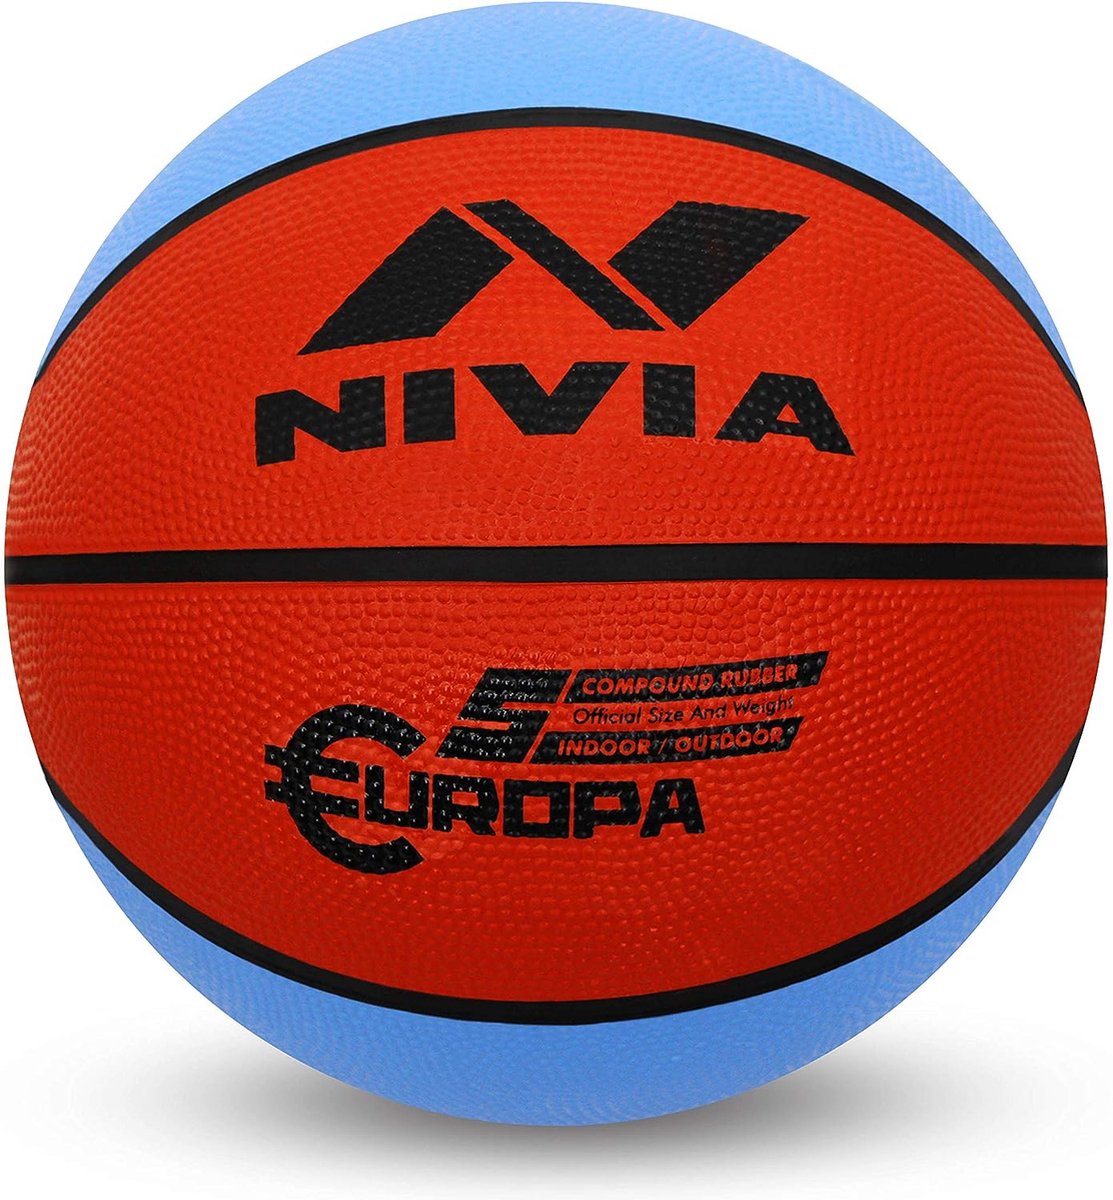 Nivia 634 Europe Basketball (Multicolour, Size 7) Material-Rubber | Ideal For: Training/Match | Machine Stitched | Universal Design